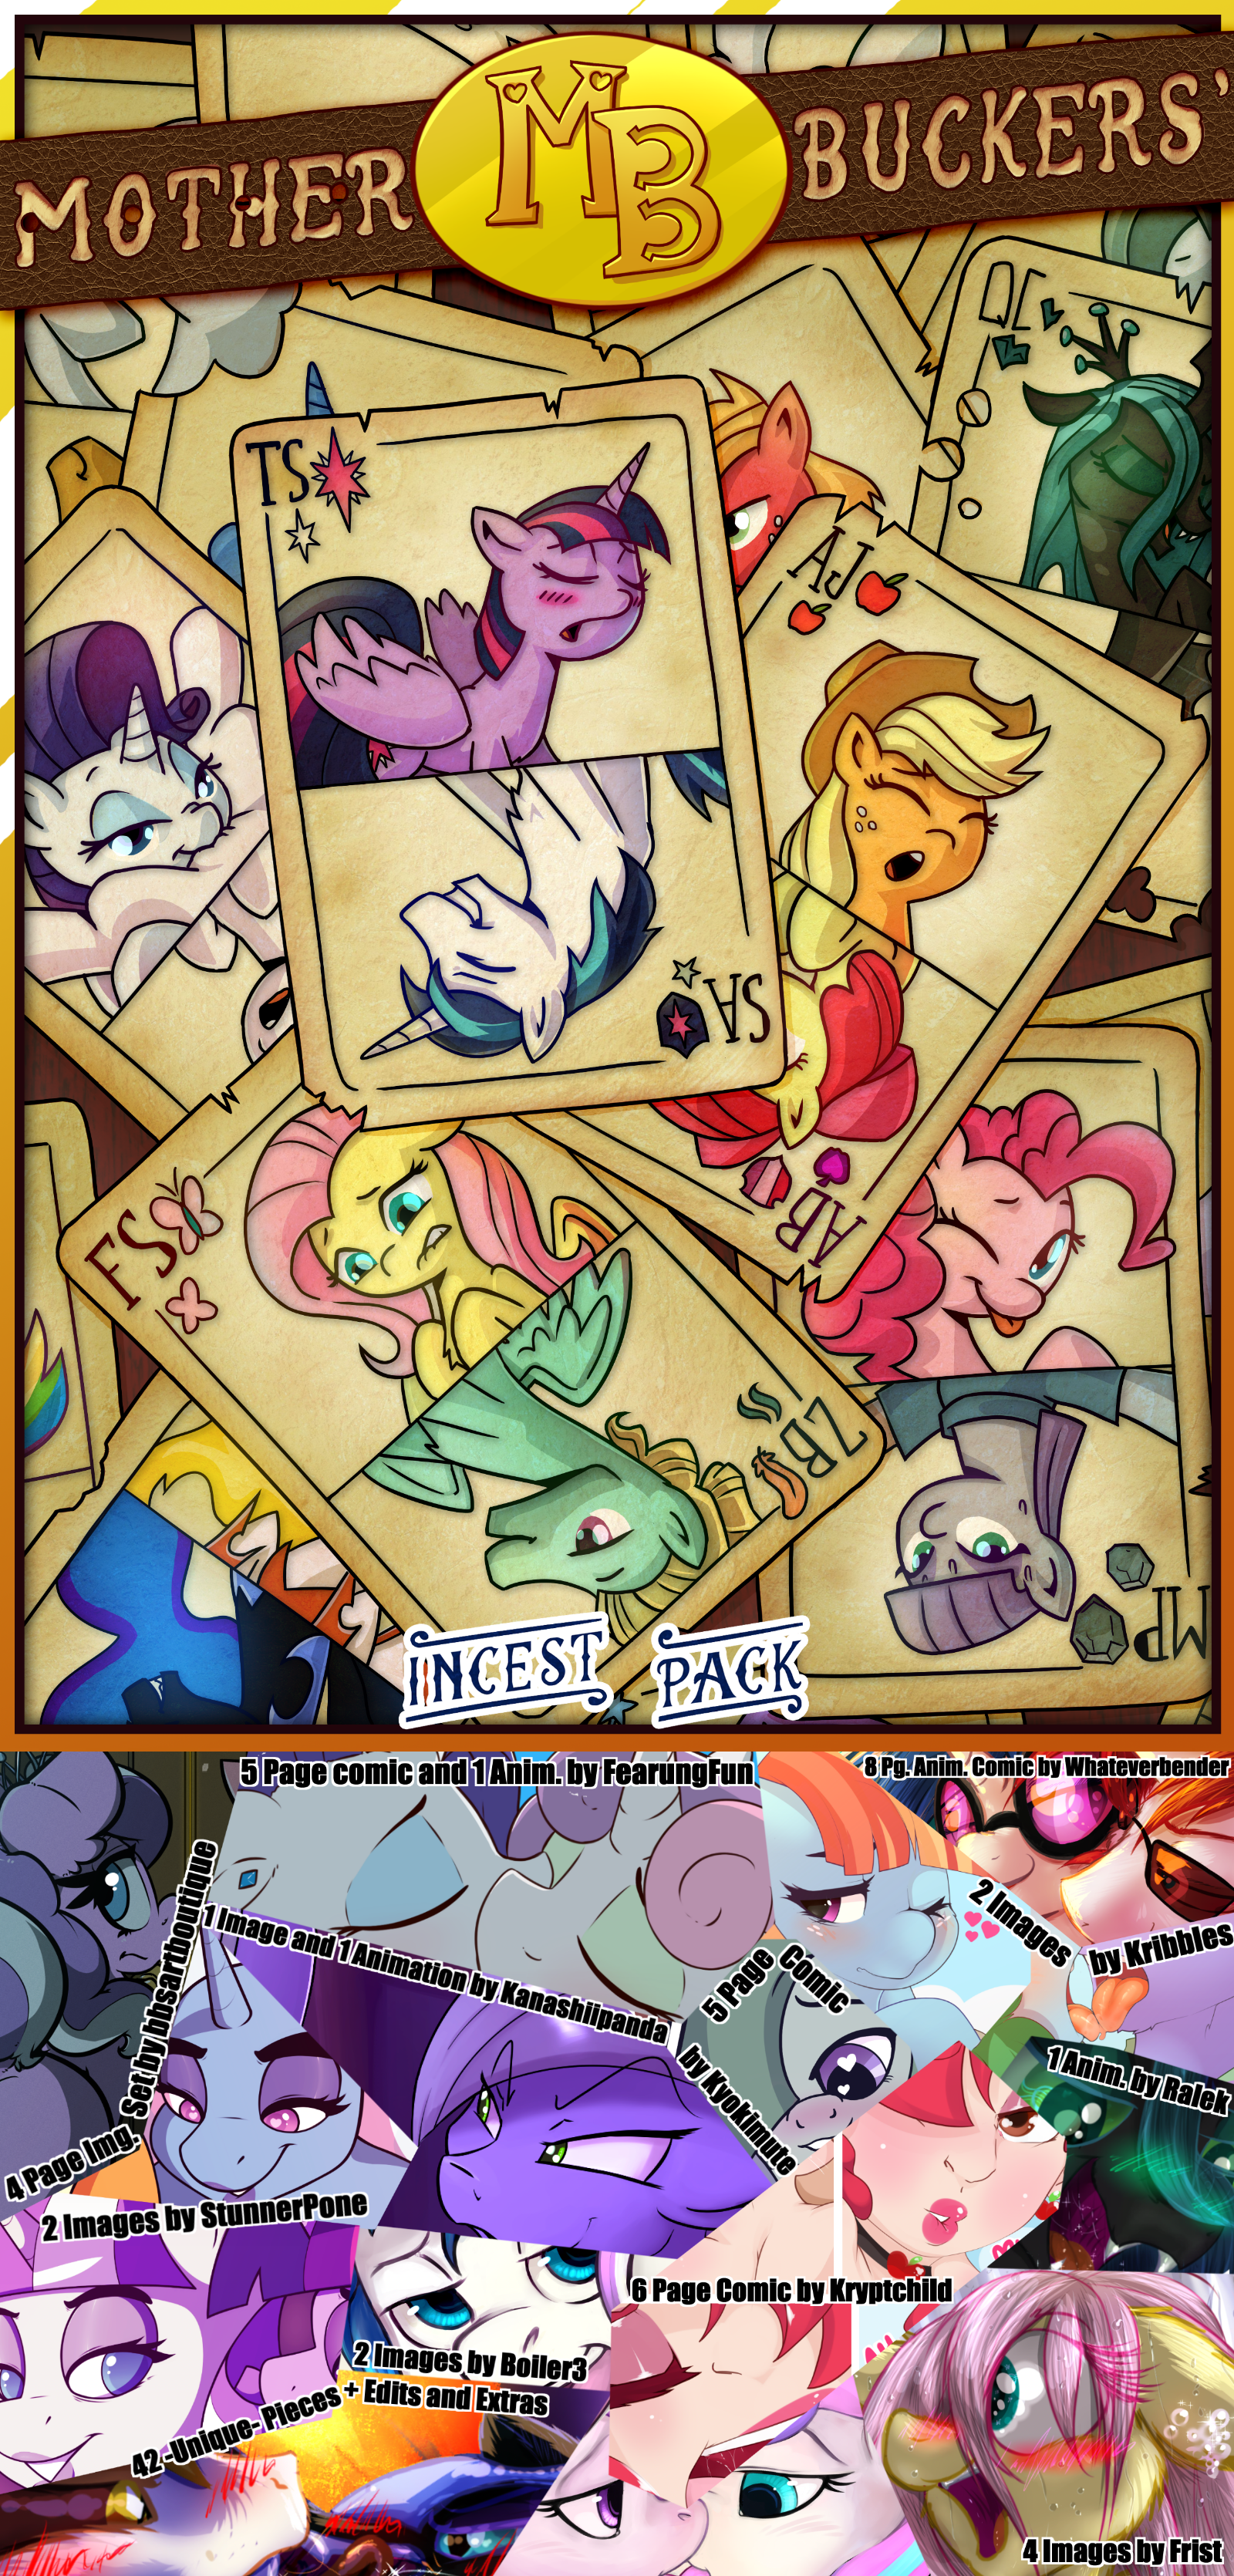 MotherBuckers' Incest Pack! by Frist44 on DeviantArt